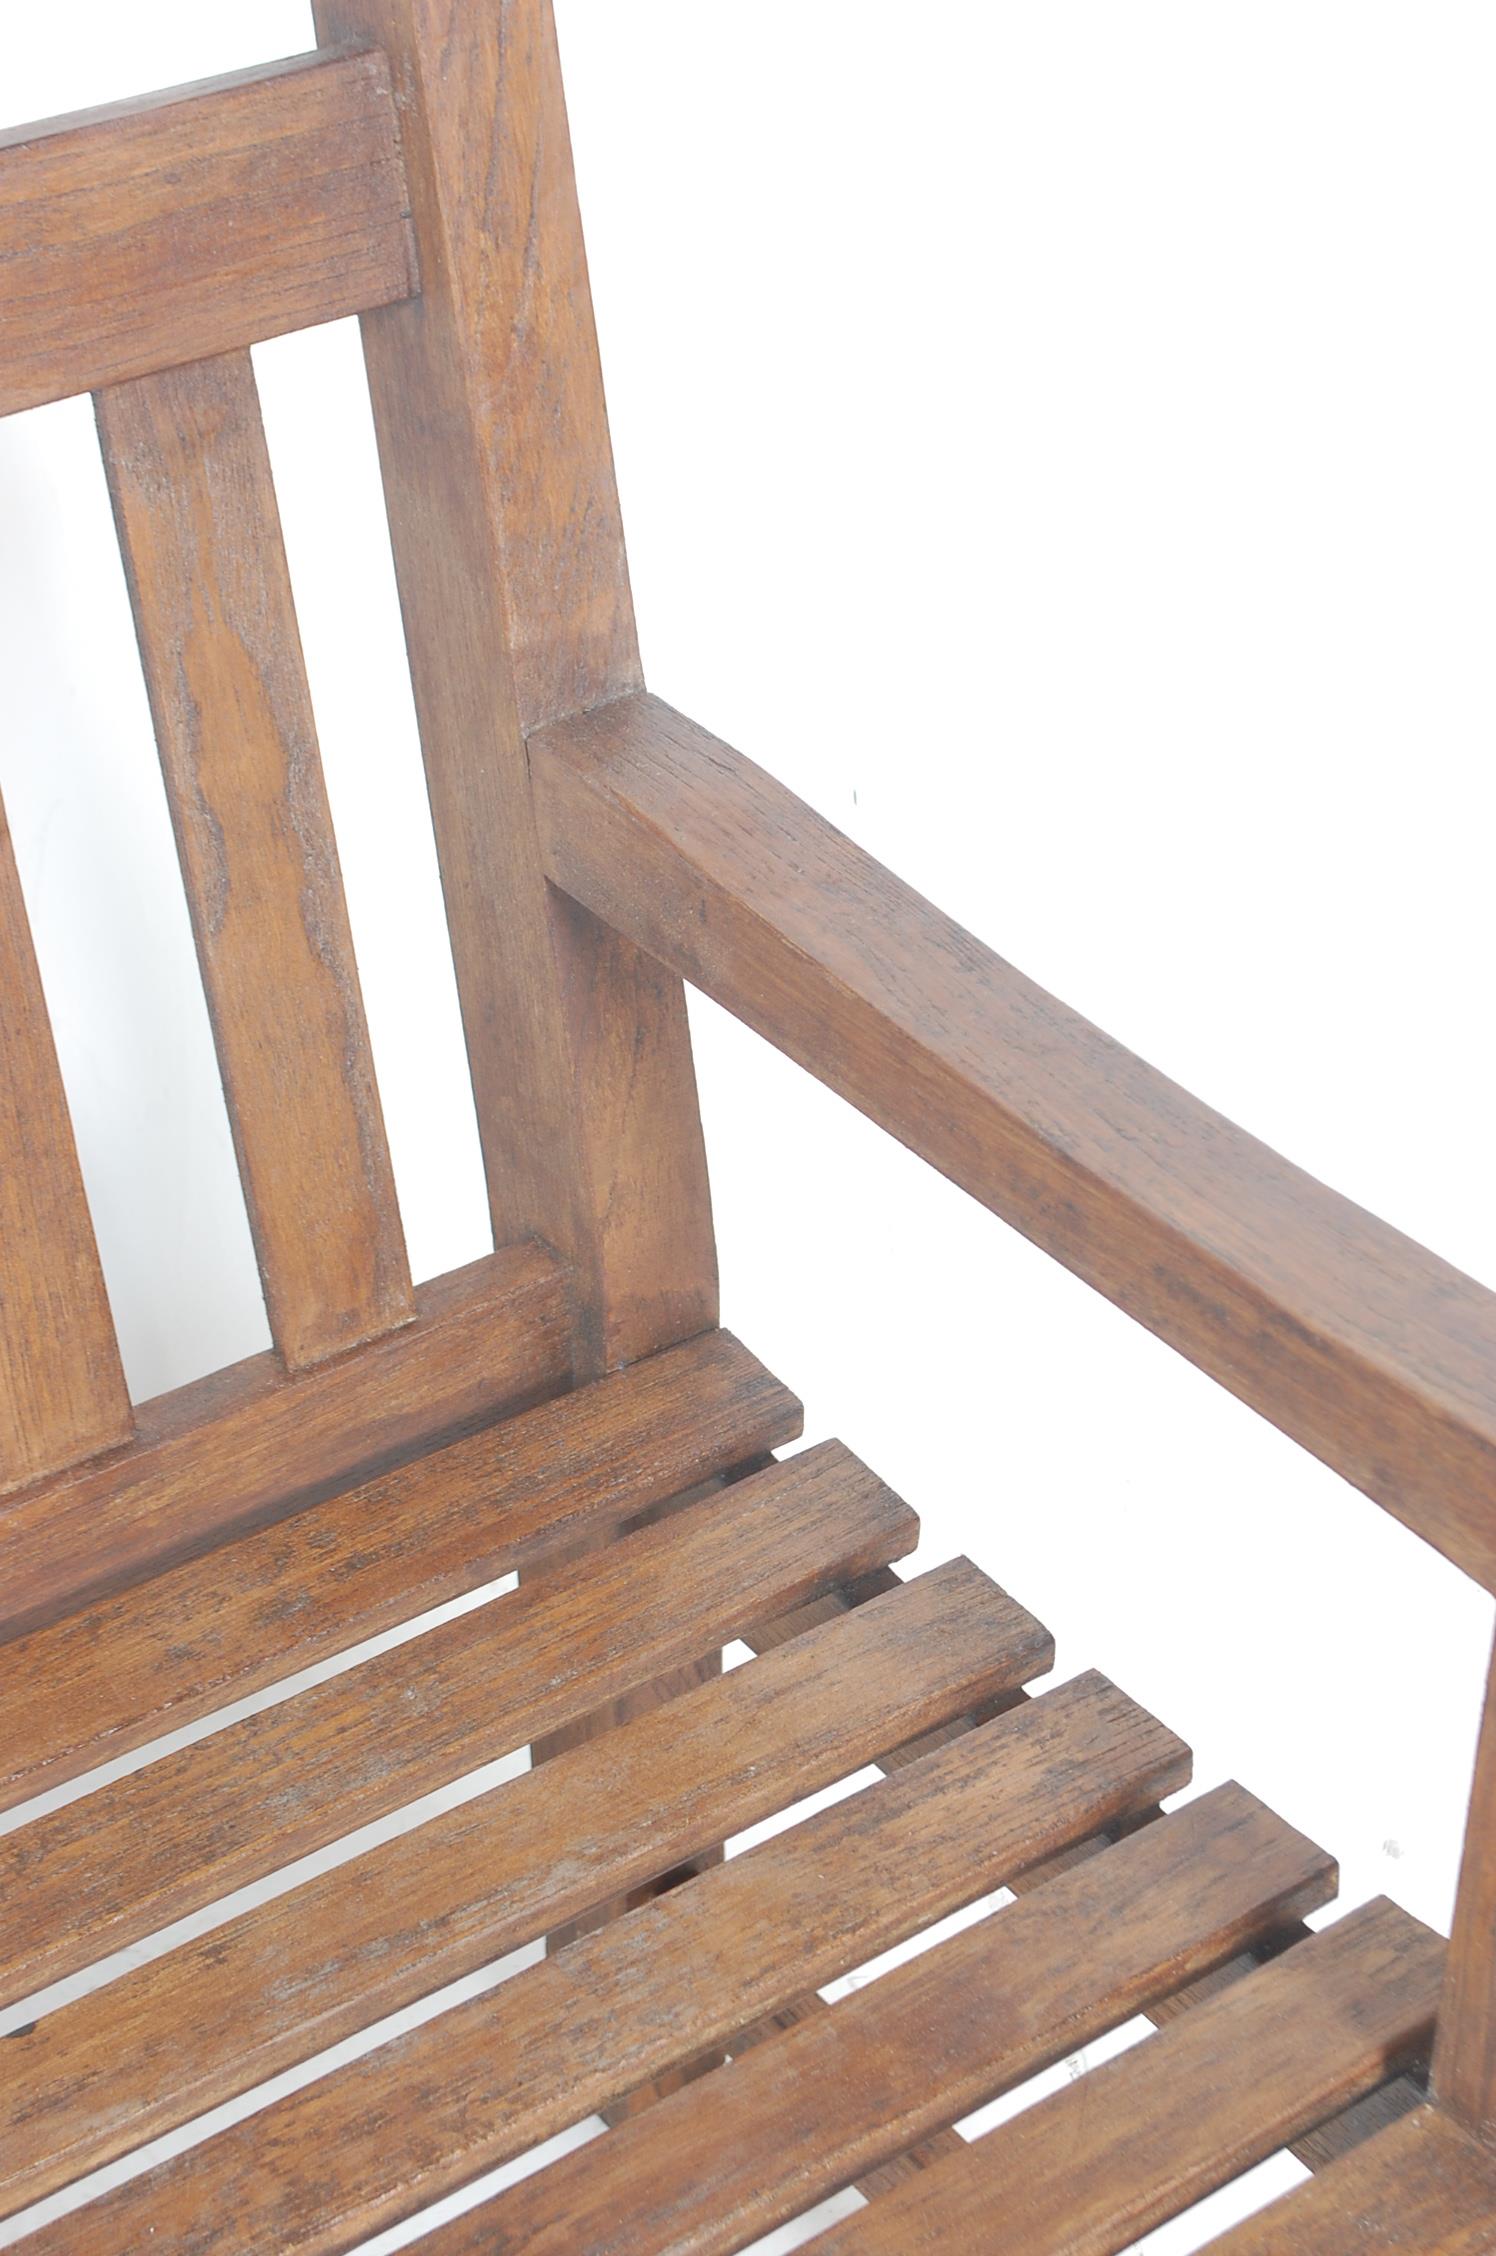 QUALITY CONTEMPORARY SOLID TEAK GARDEN BENCH - Image 5 of 6